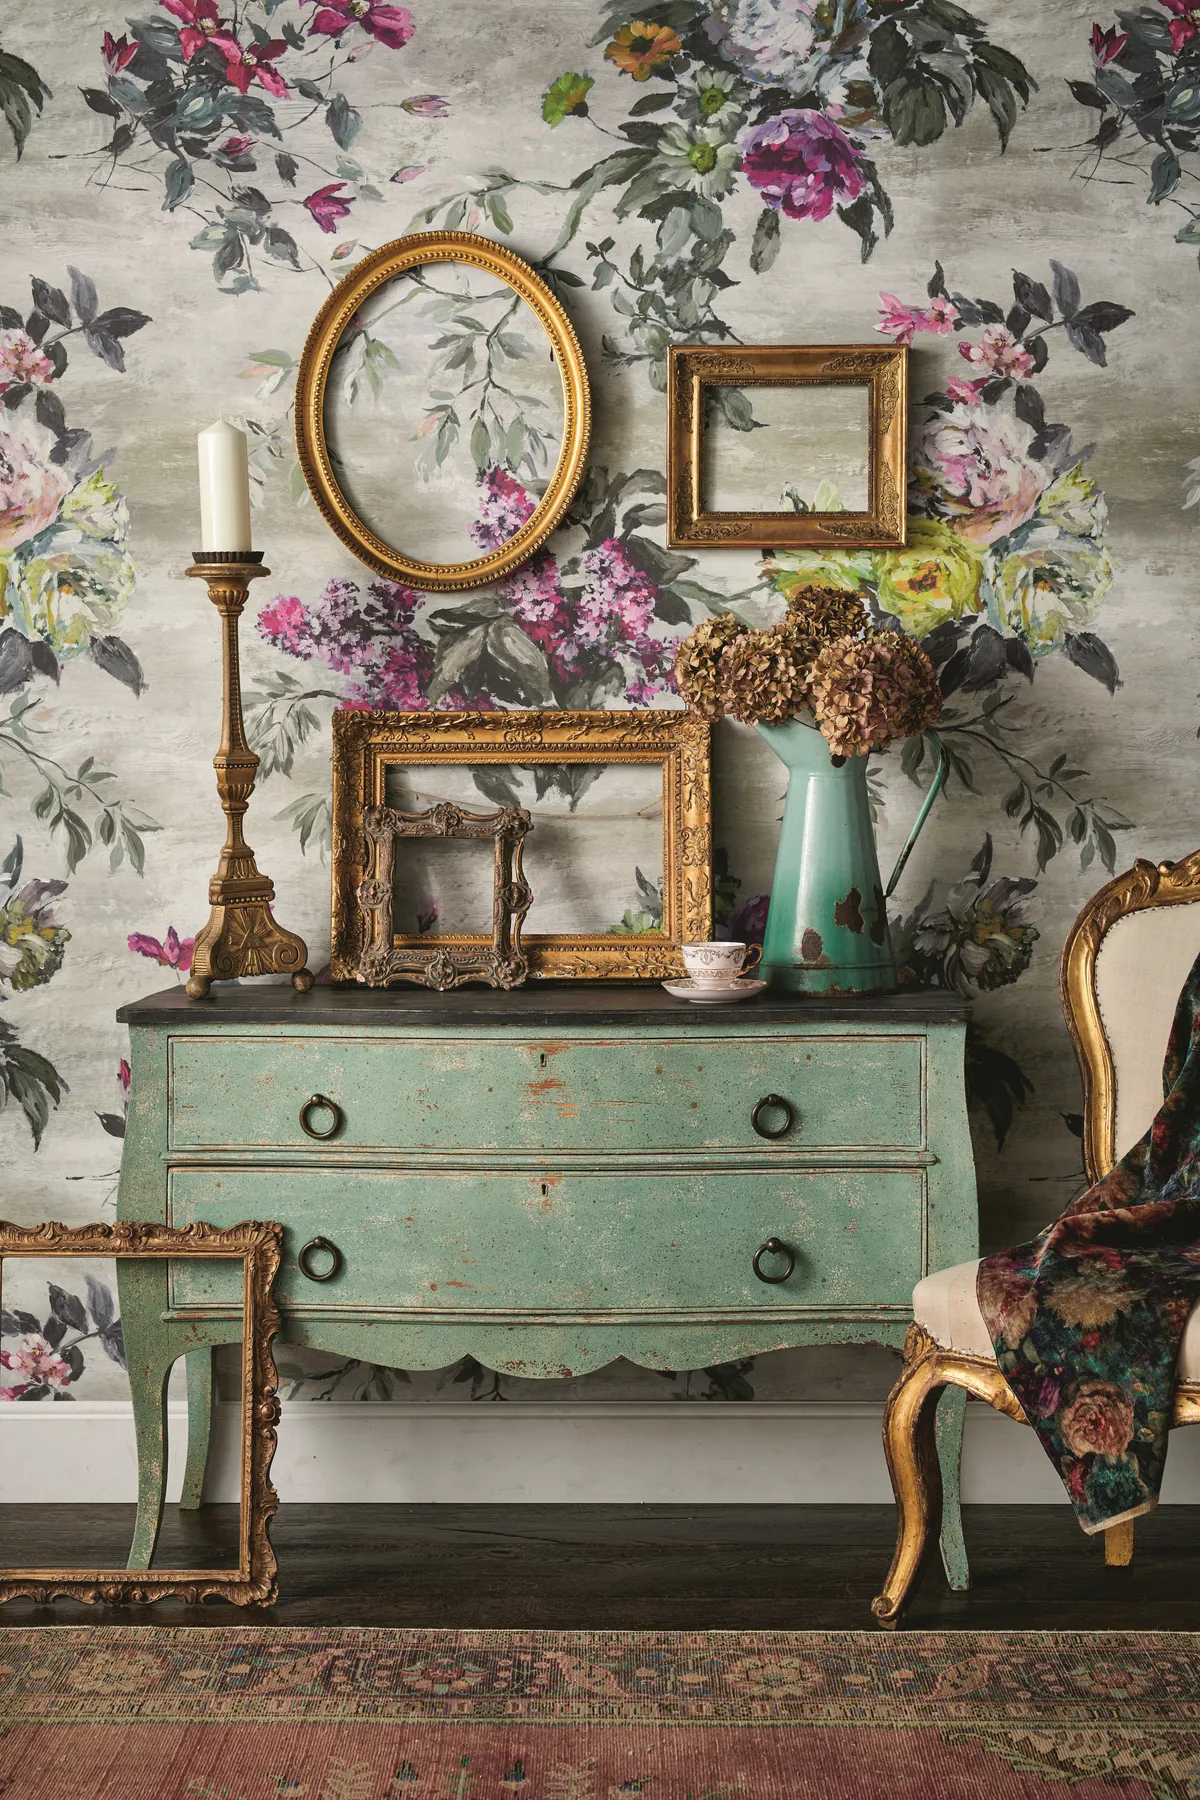 An antique commode against statement floral wallpaper, gold frames in different sizes sit atop the commode.